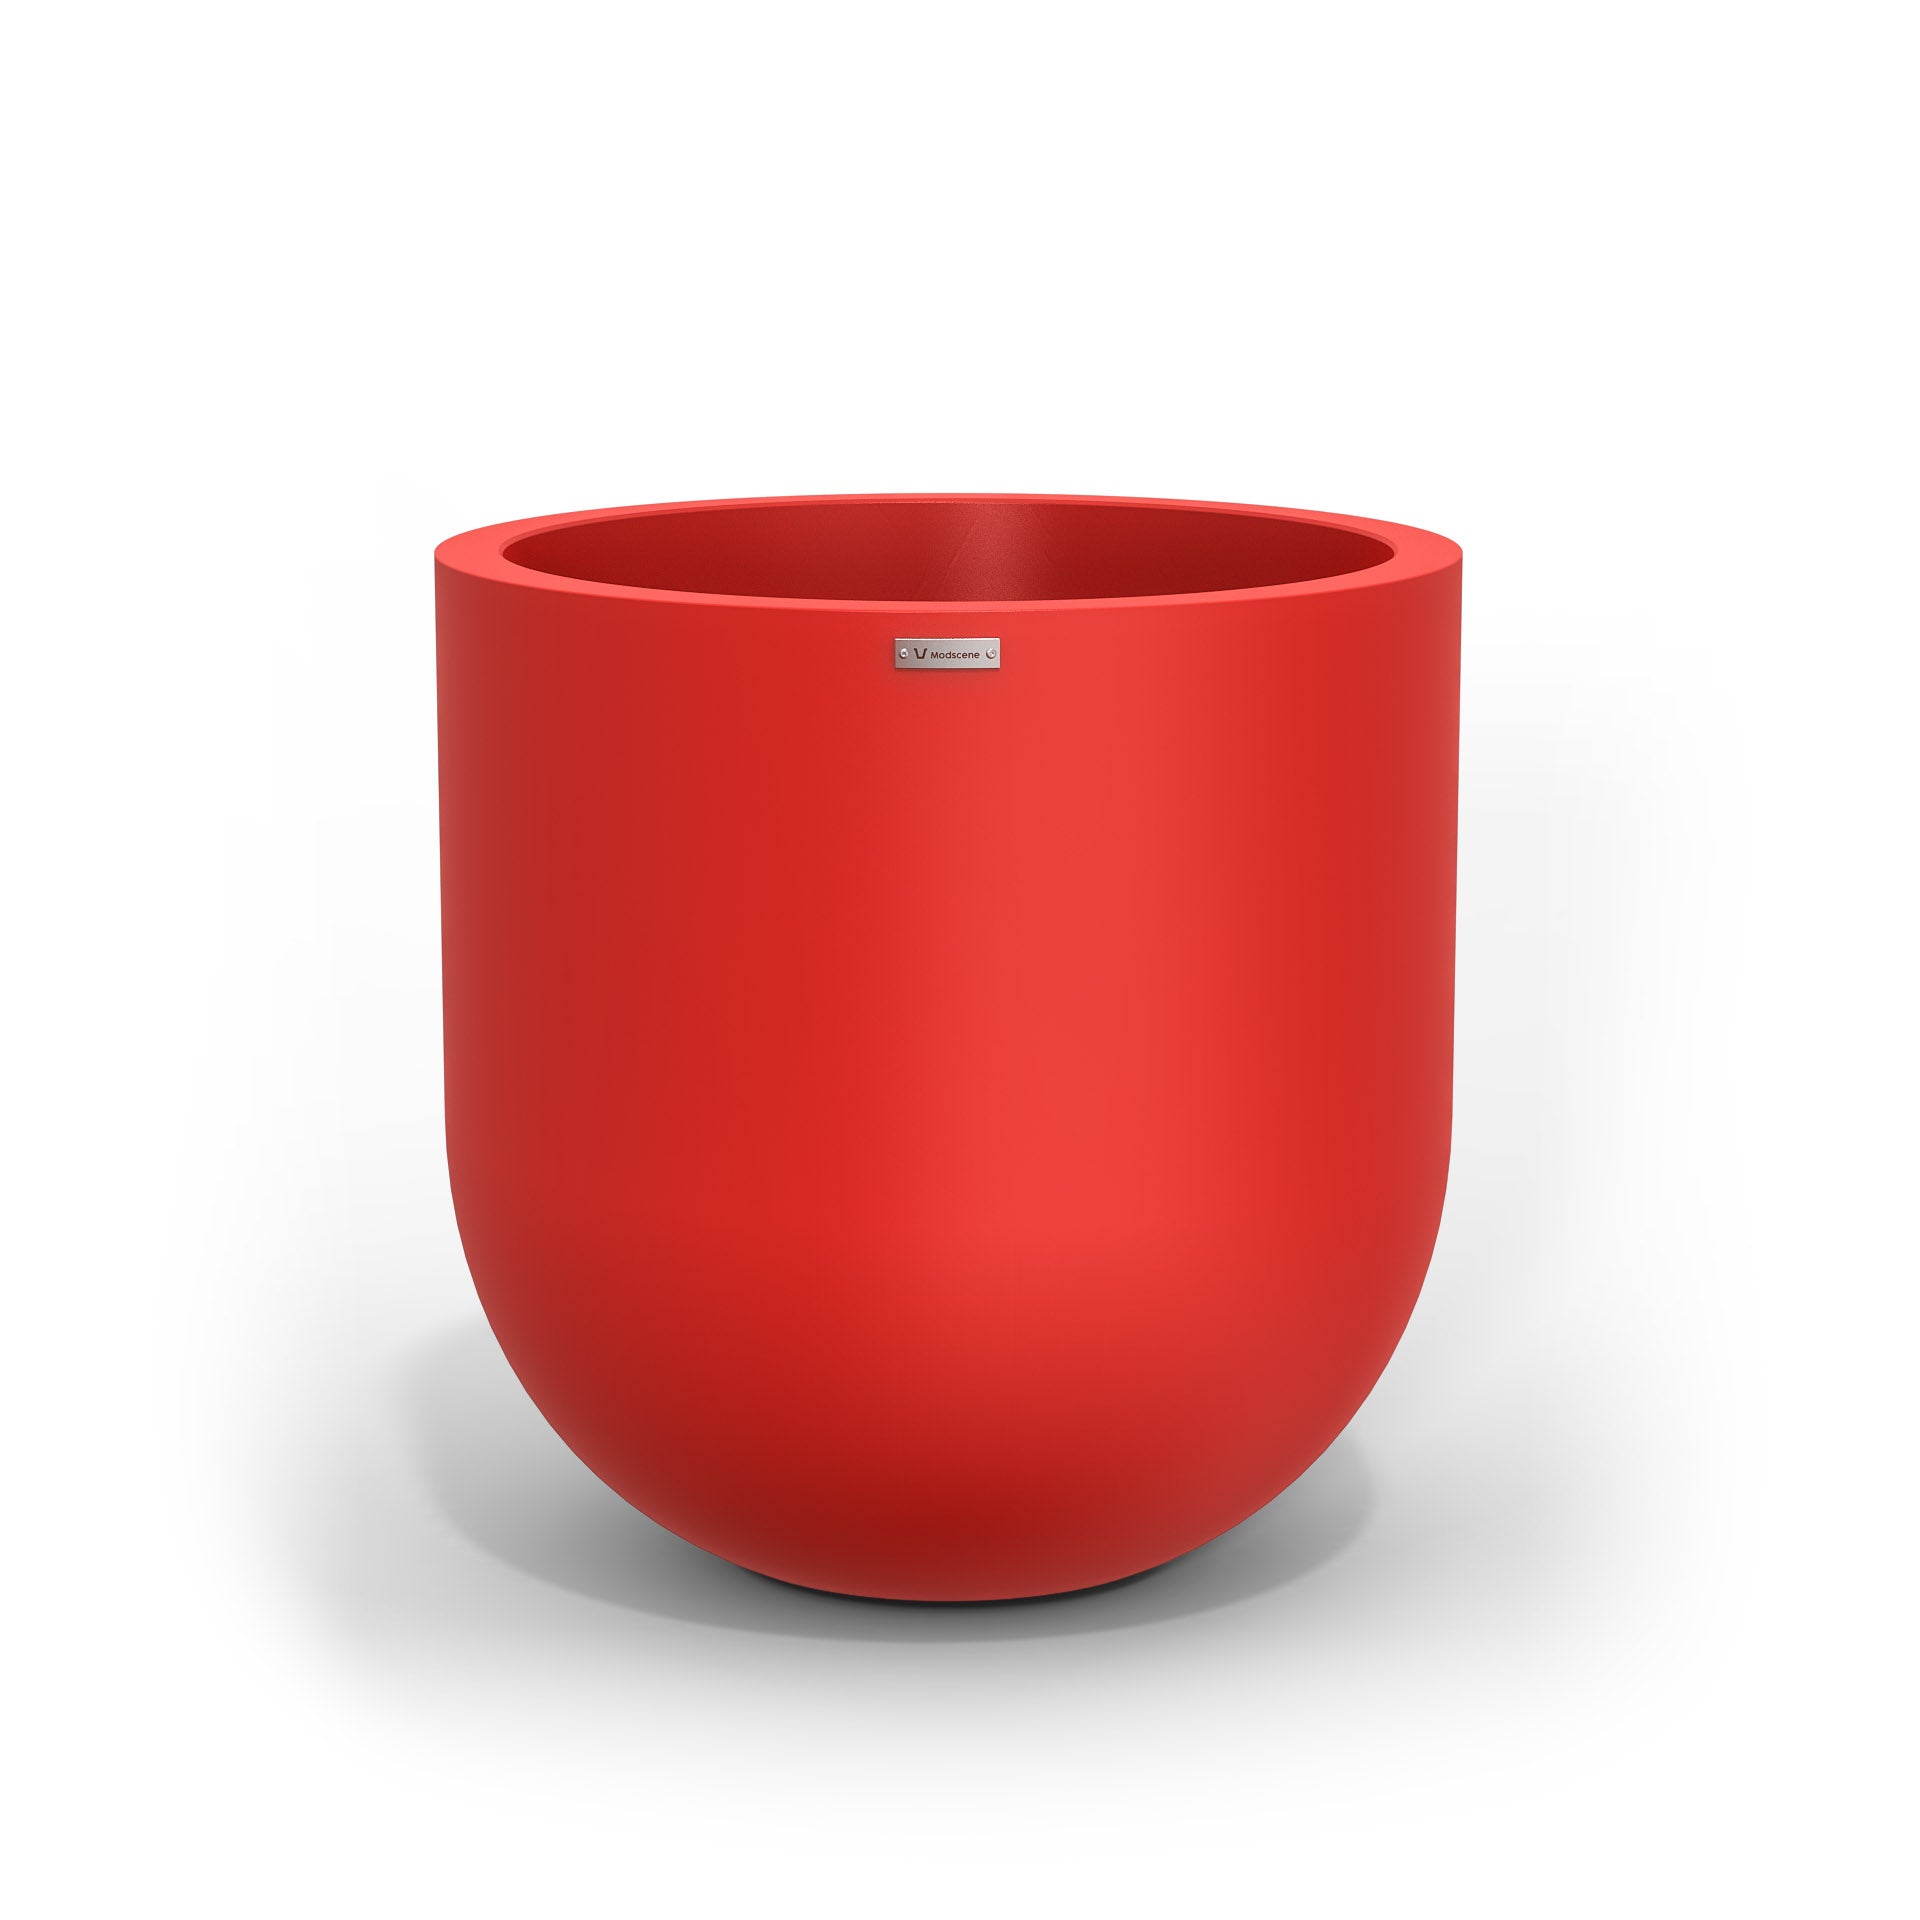 Large Modscene planter pot in a red colour. Made in New Zealand